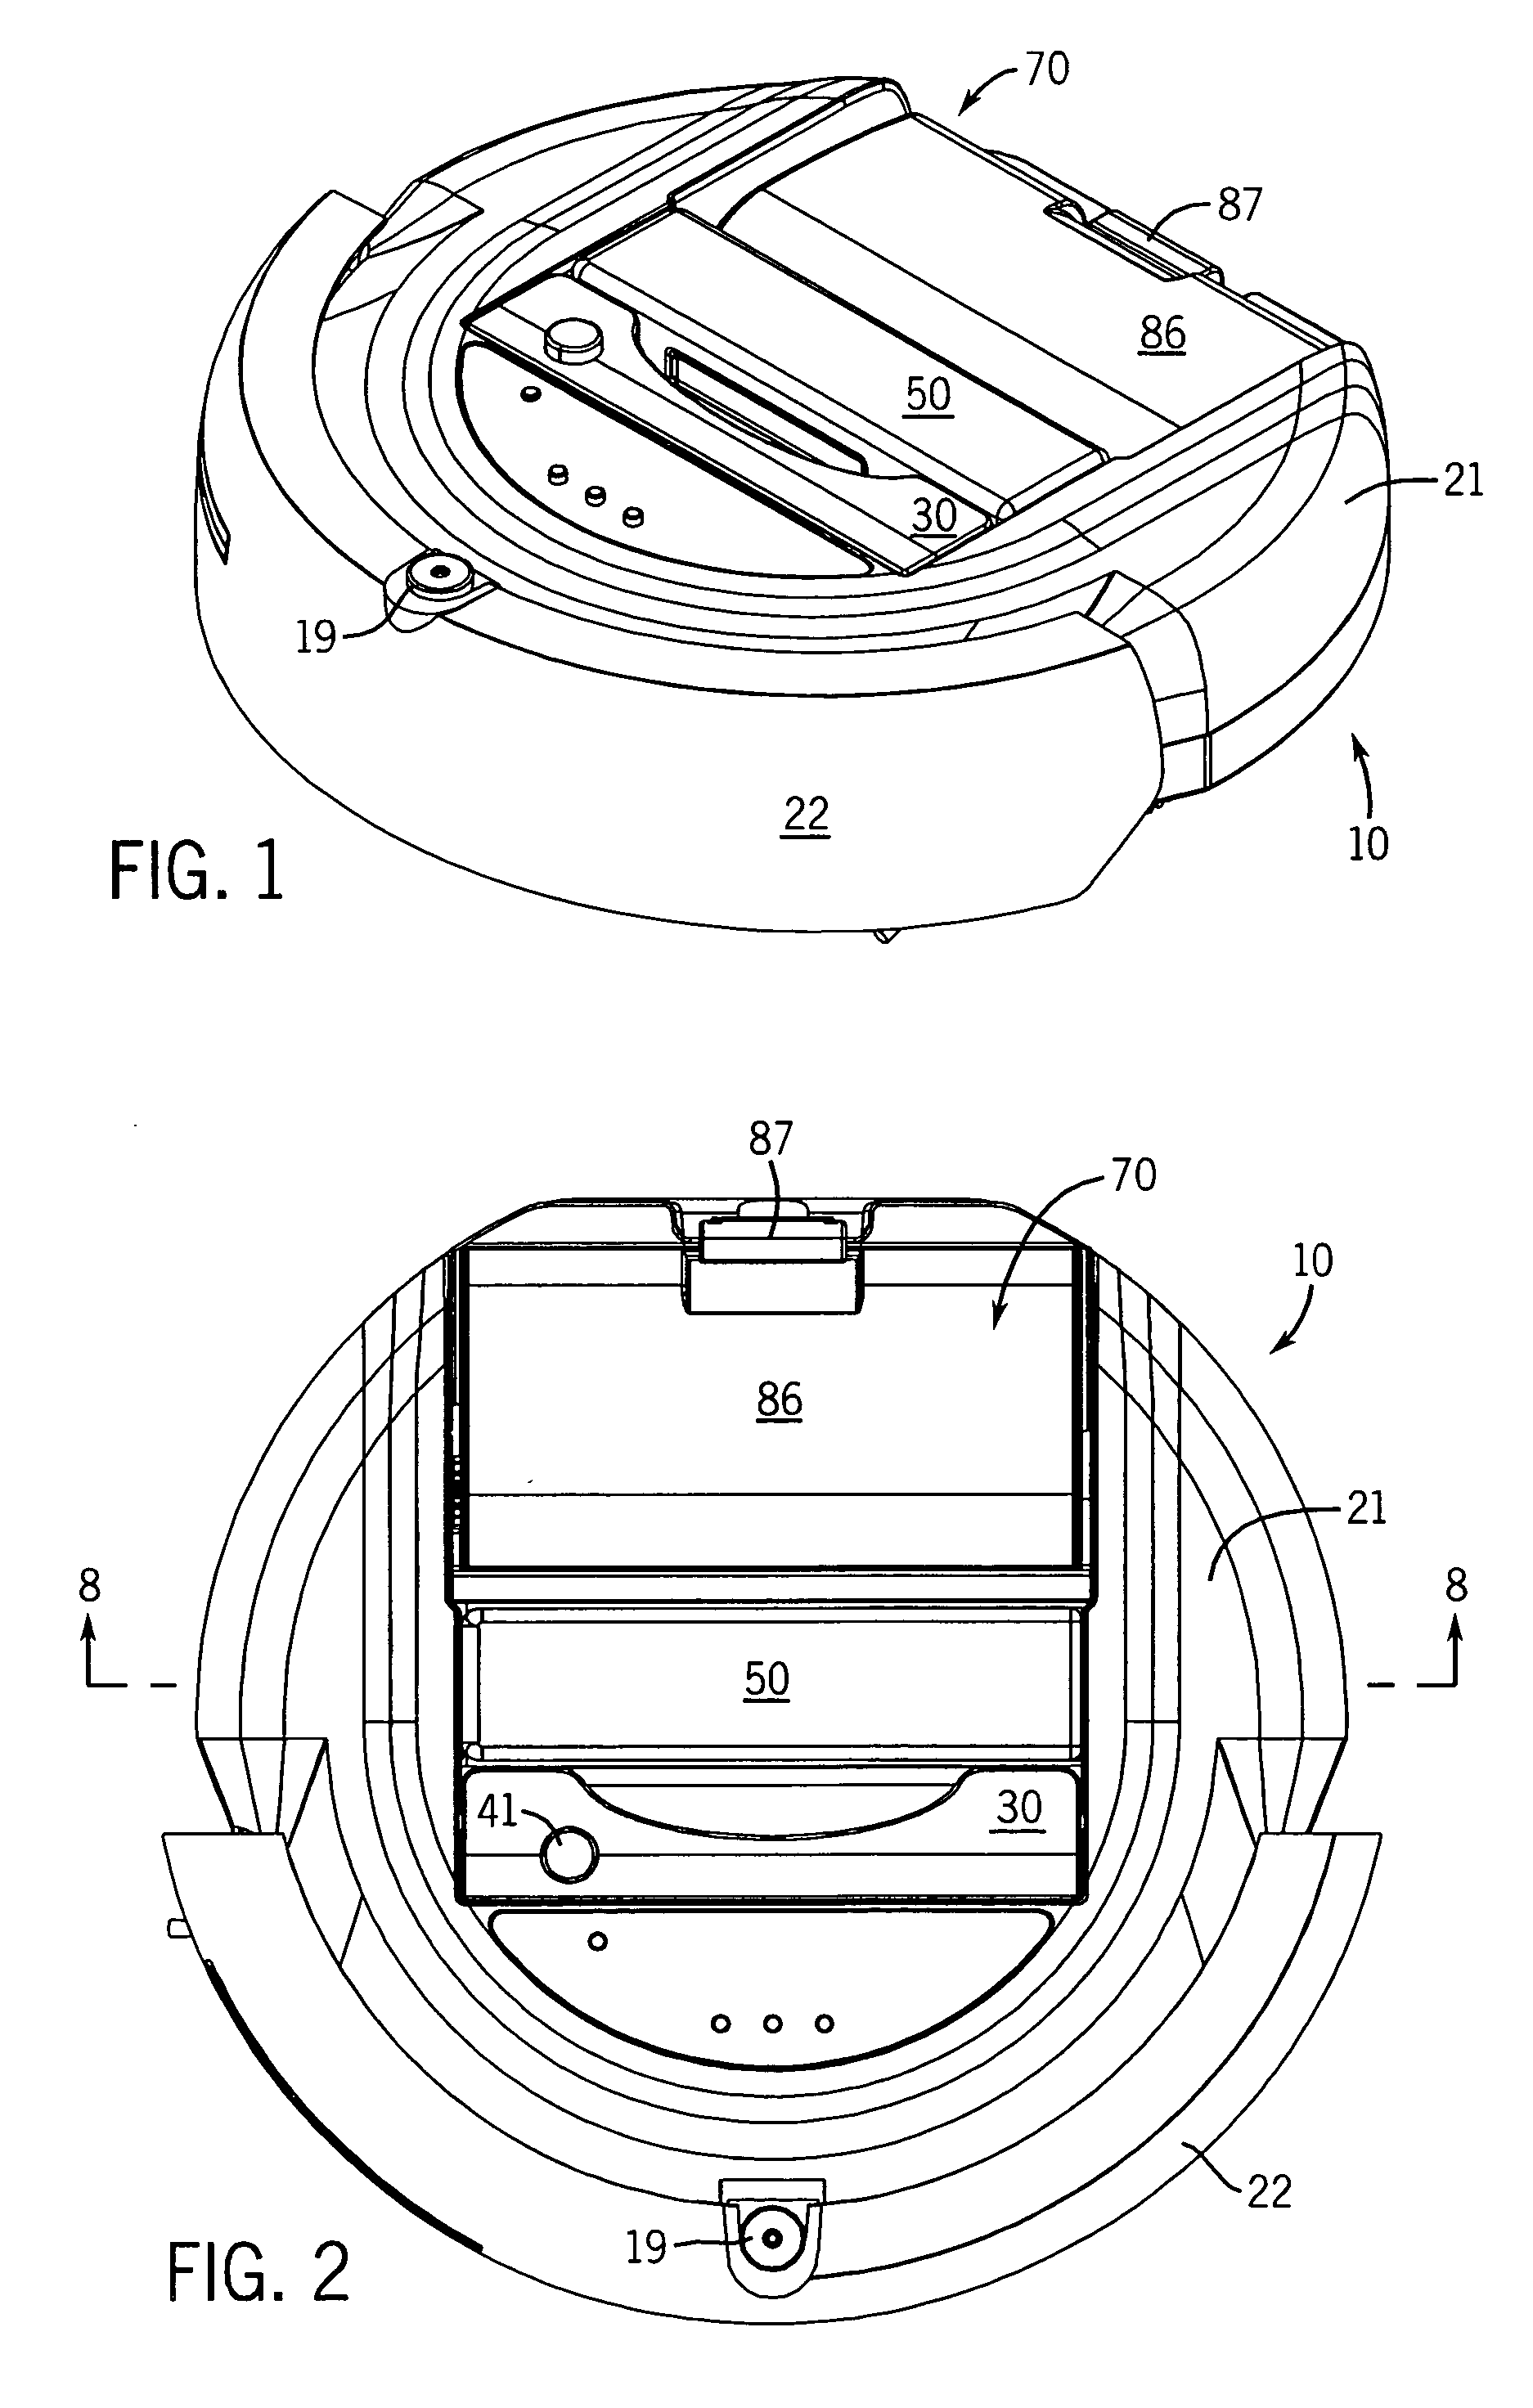 Surface treating device with top load cartridge-based cleaning system